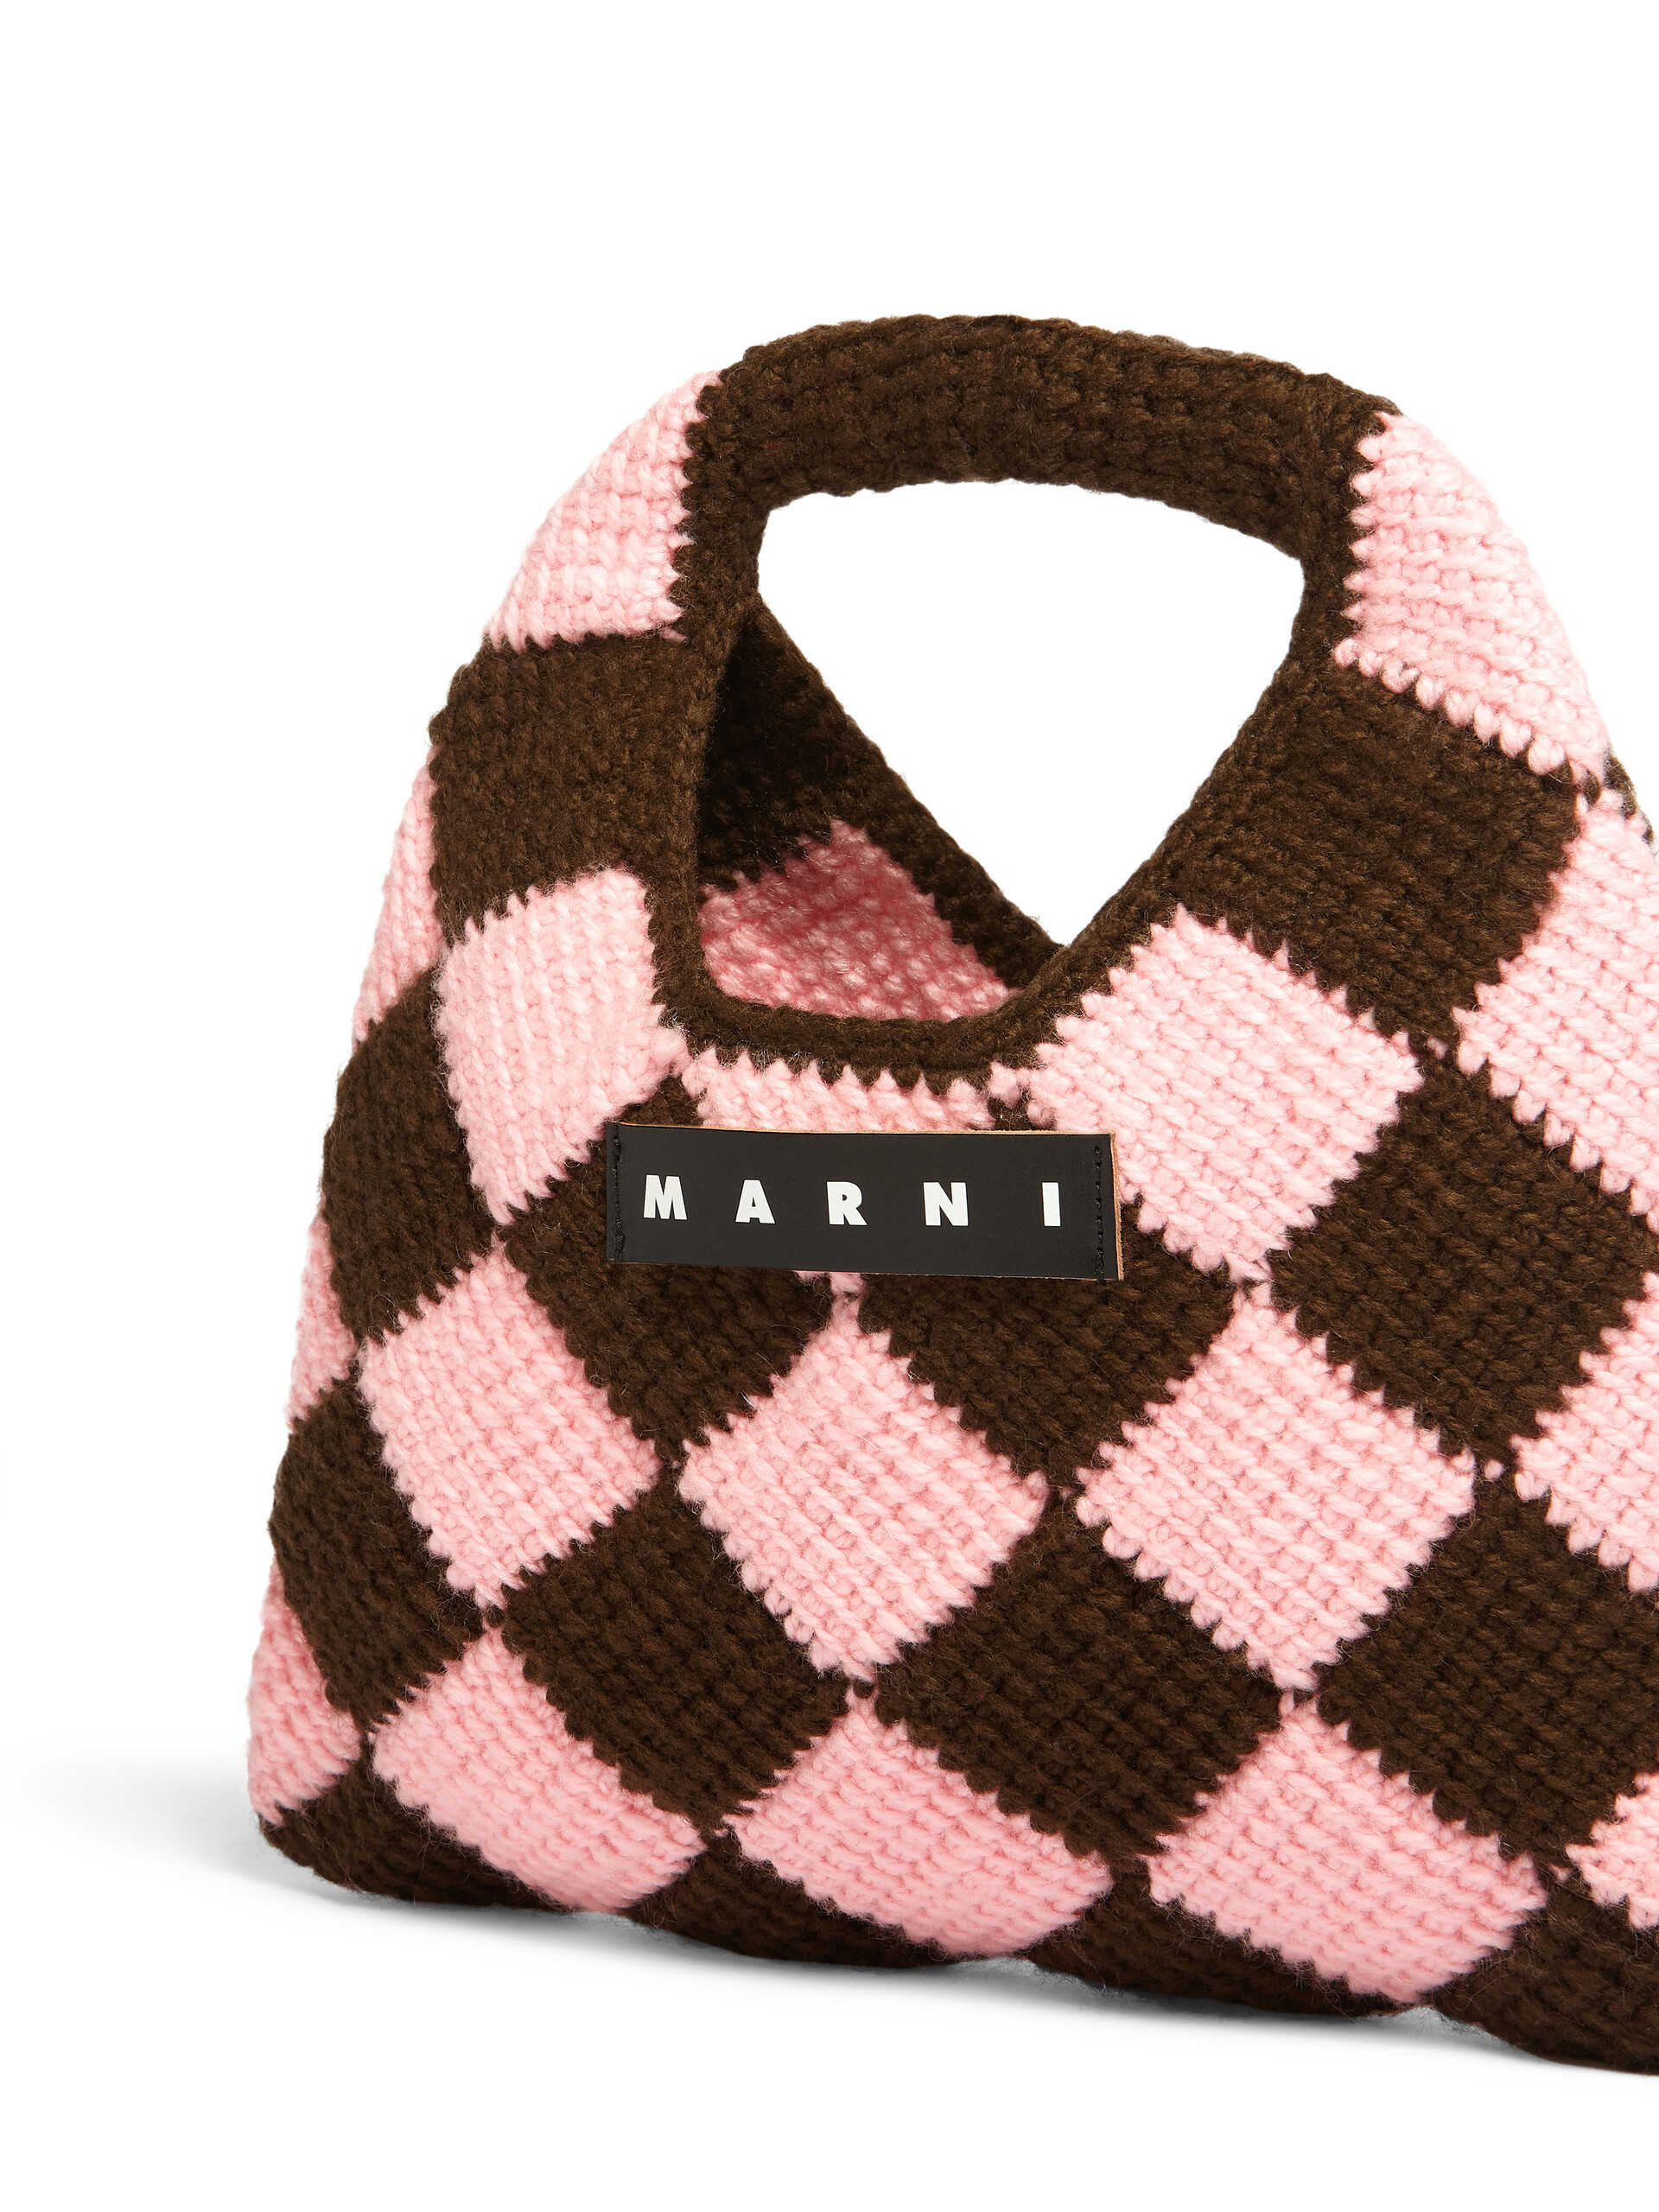 MARNI MARKET DIAMOND small bag in brown and pink tech wool - Shopping Bags - Image 4